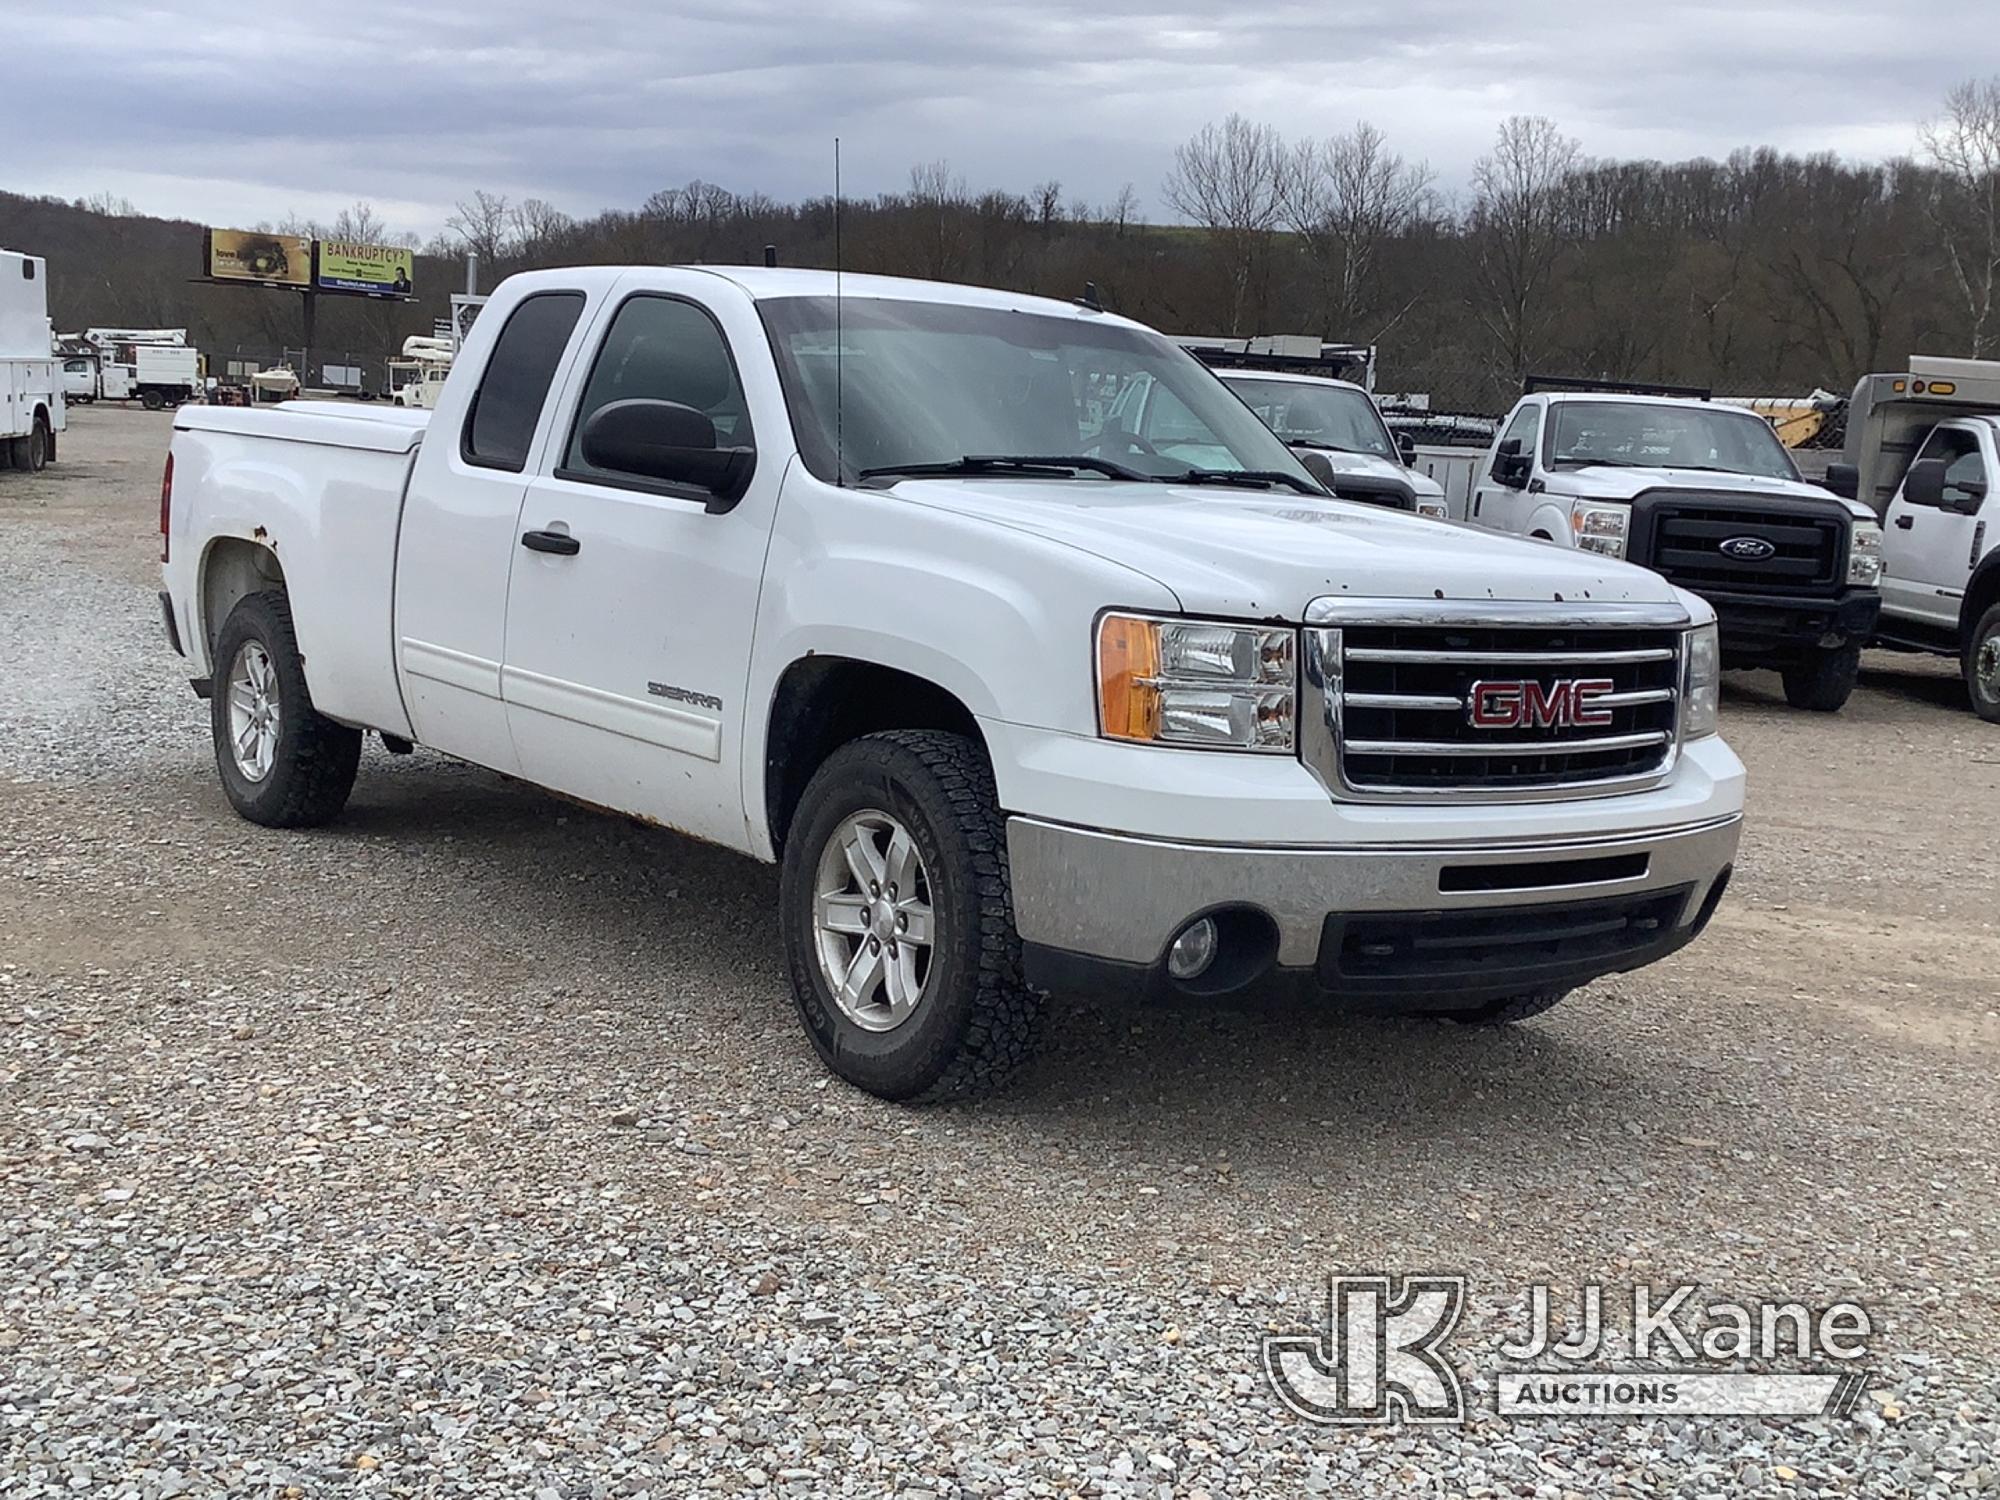 (Smock, PA) 2013 GMC Sierra 1500 4x4 Extended-Cab Pickup Truck Title Delay) (Runs & Moves, Rust & Bo